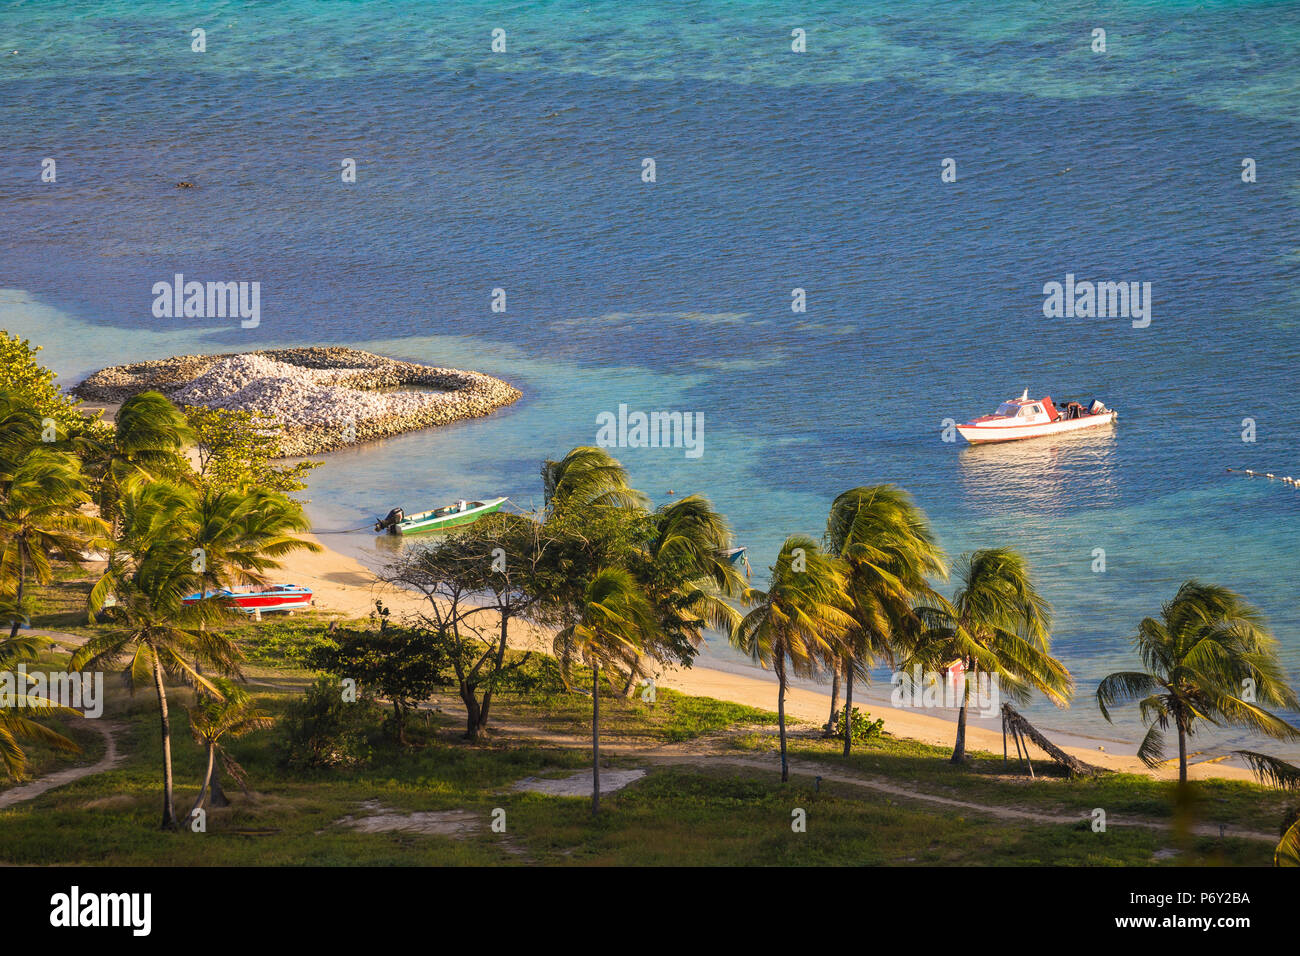 St Vincent and The Grenadines, Union Island Stock Photo